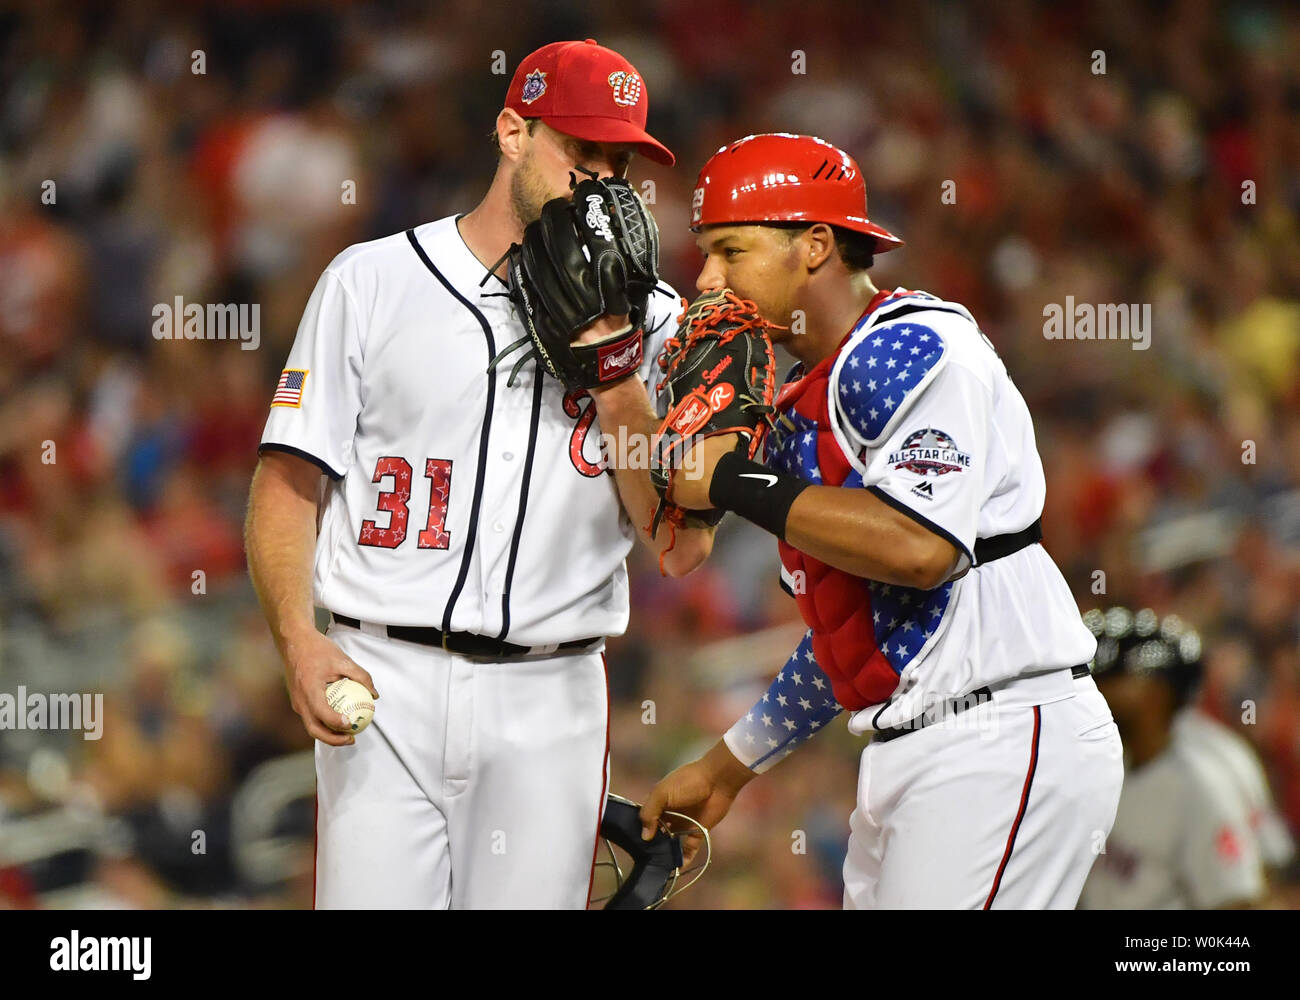 Washington Nationals starting pitcher Max Scherzer (31) talks to catcher  Pedro Severino as they meet on the mound in the sixth inning against the  Boston Red Sox at Nationals Park in Washington